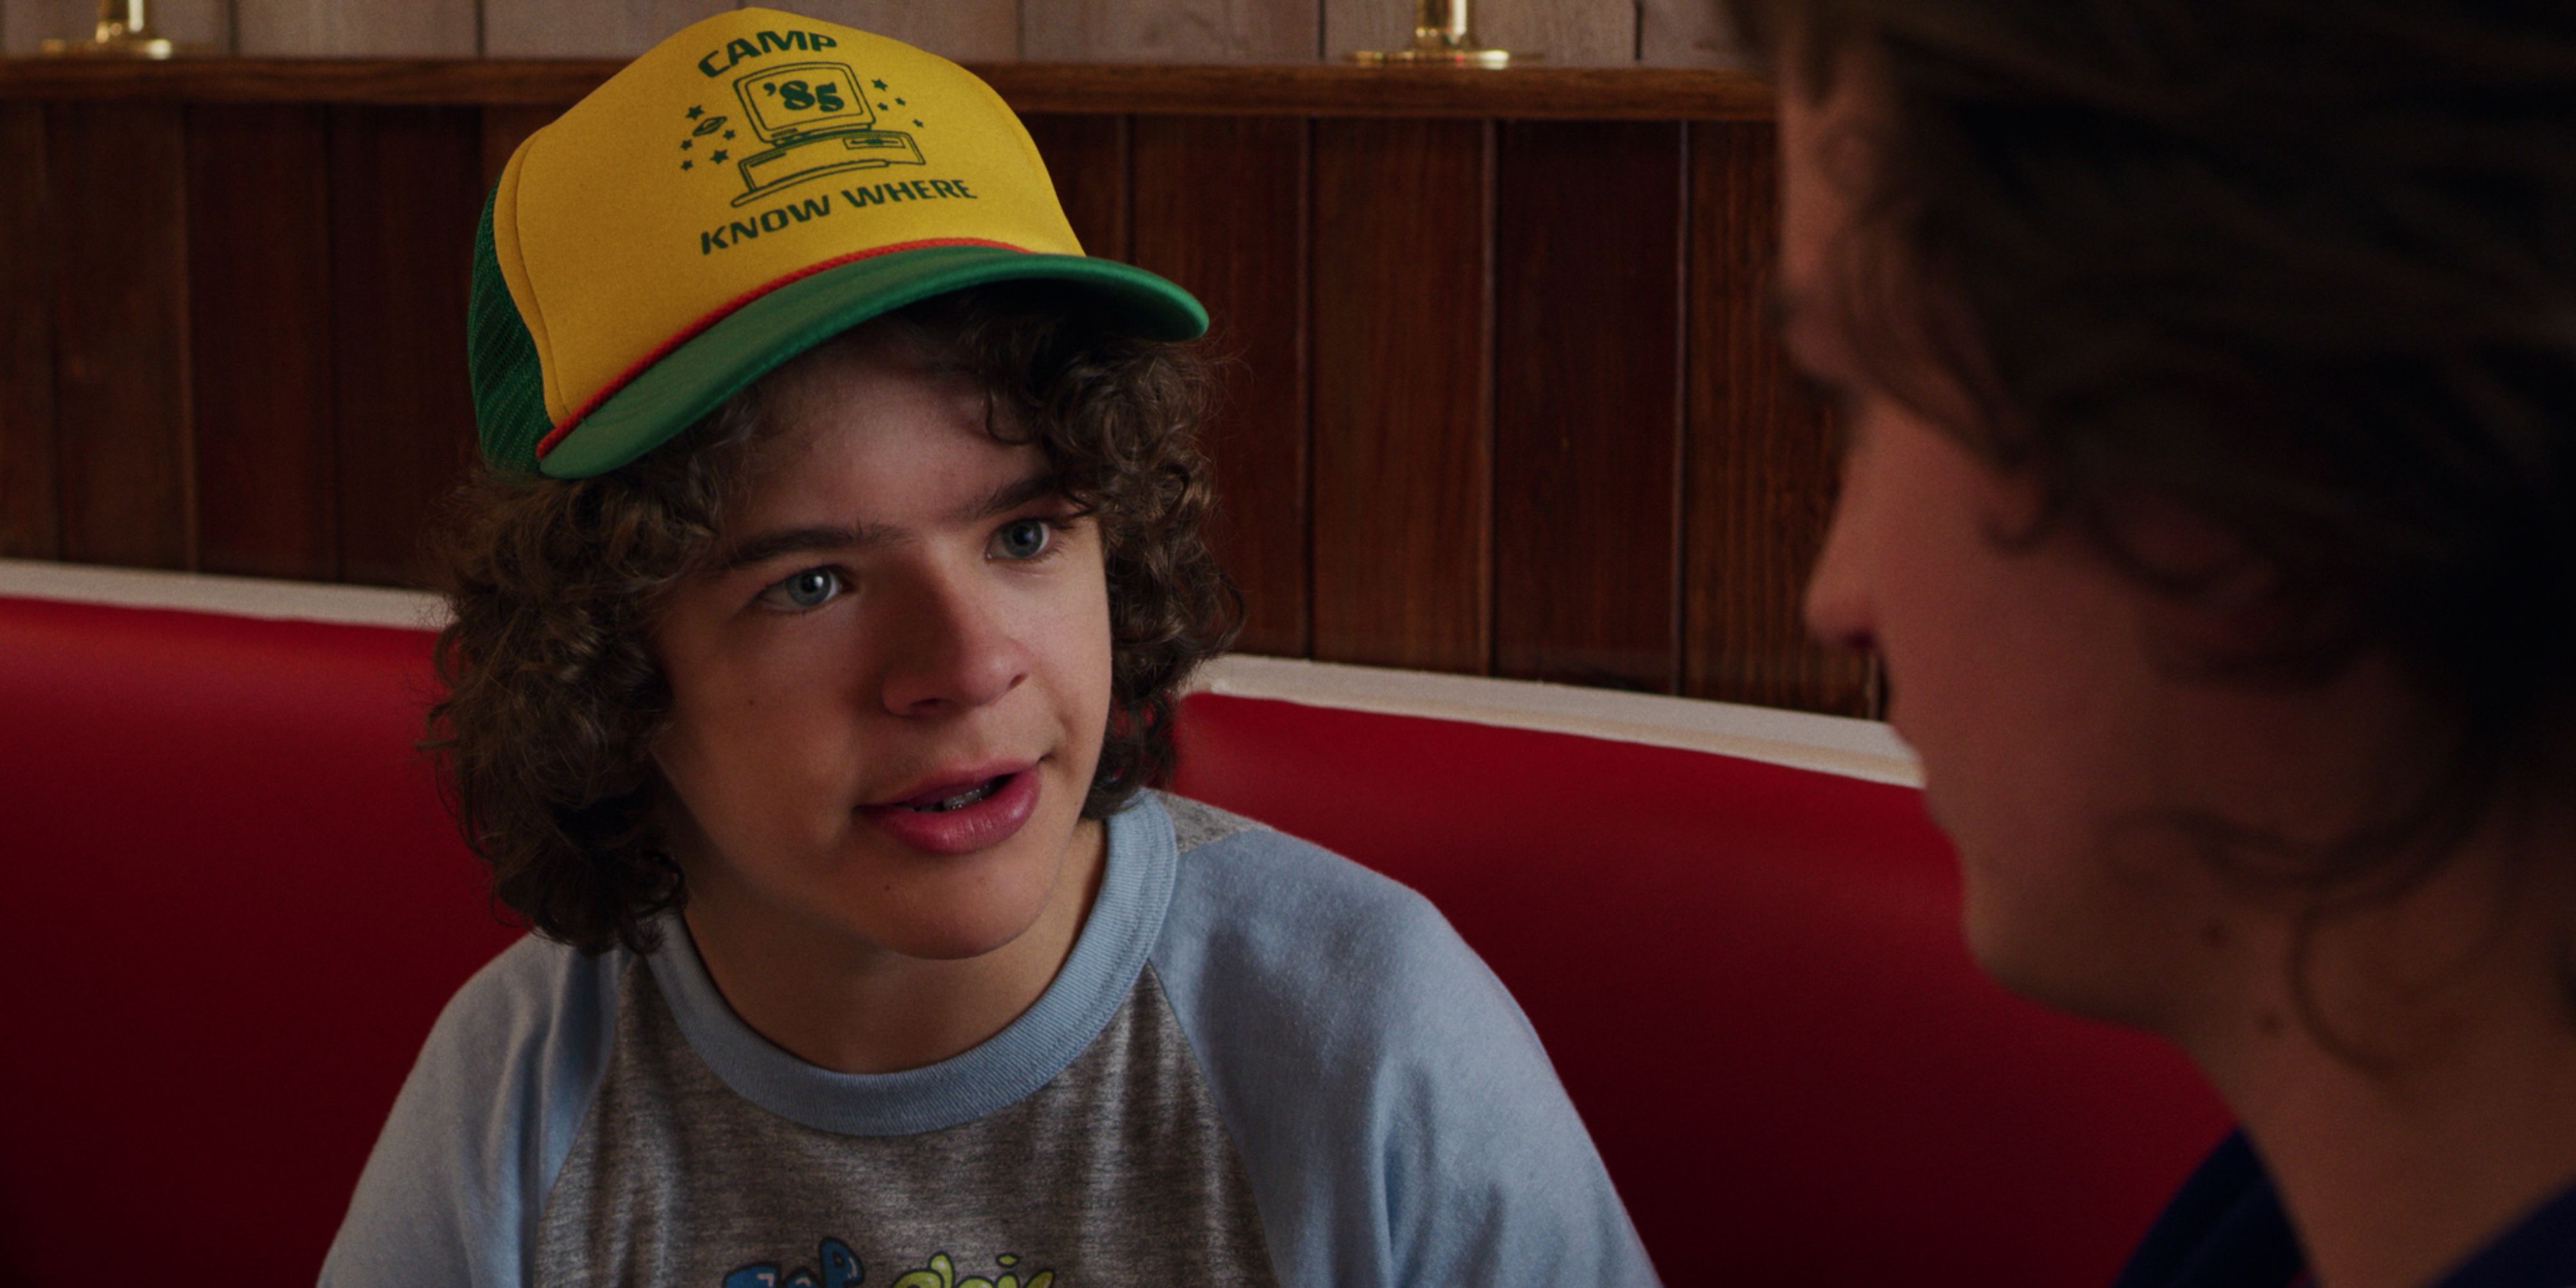 The Stranger Things Cast Will Make Enough Money To Buy The Upside